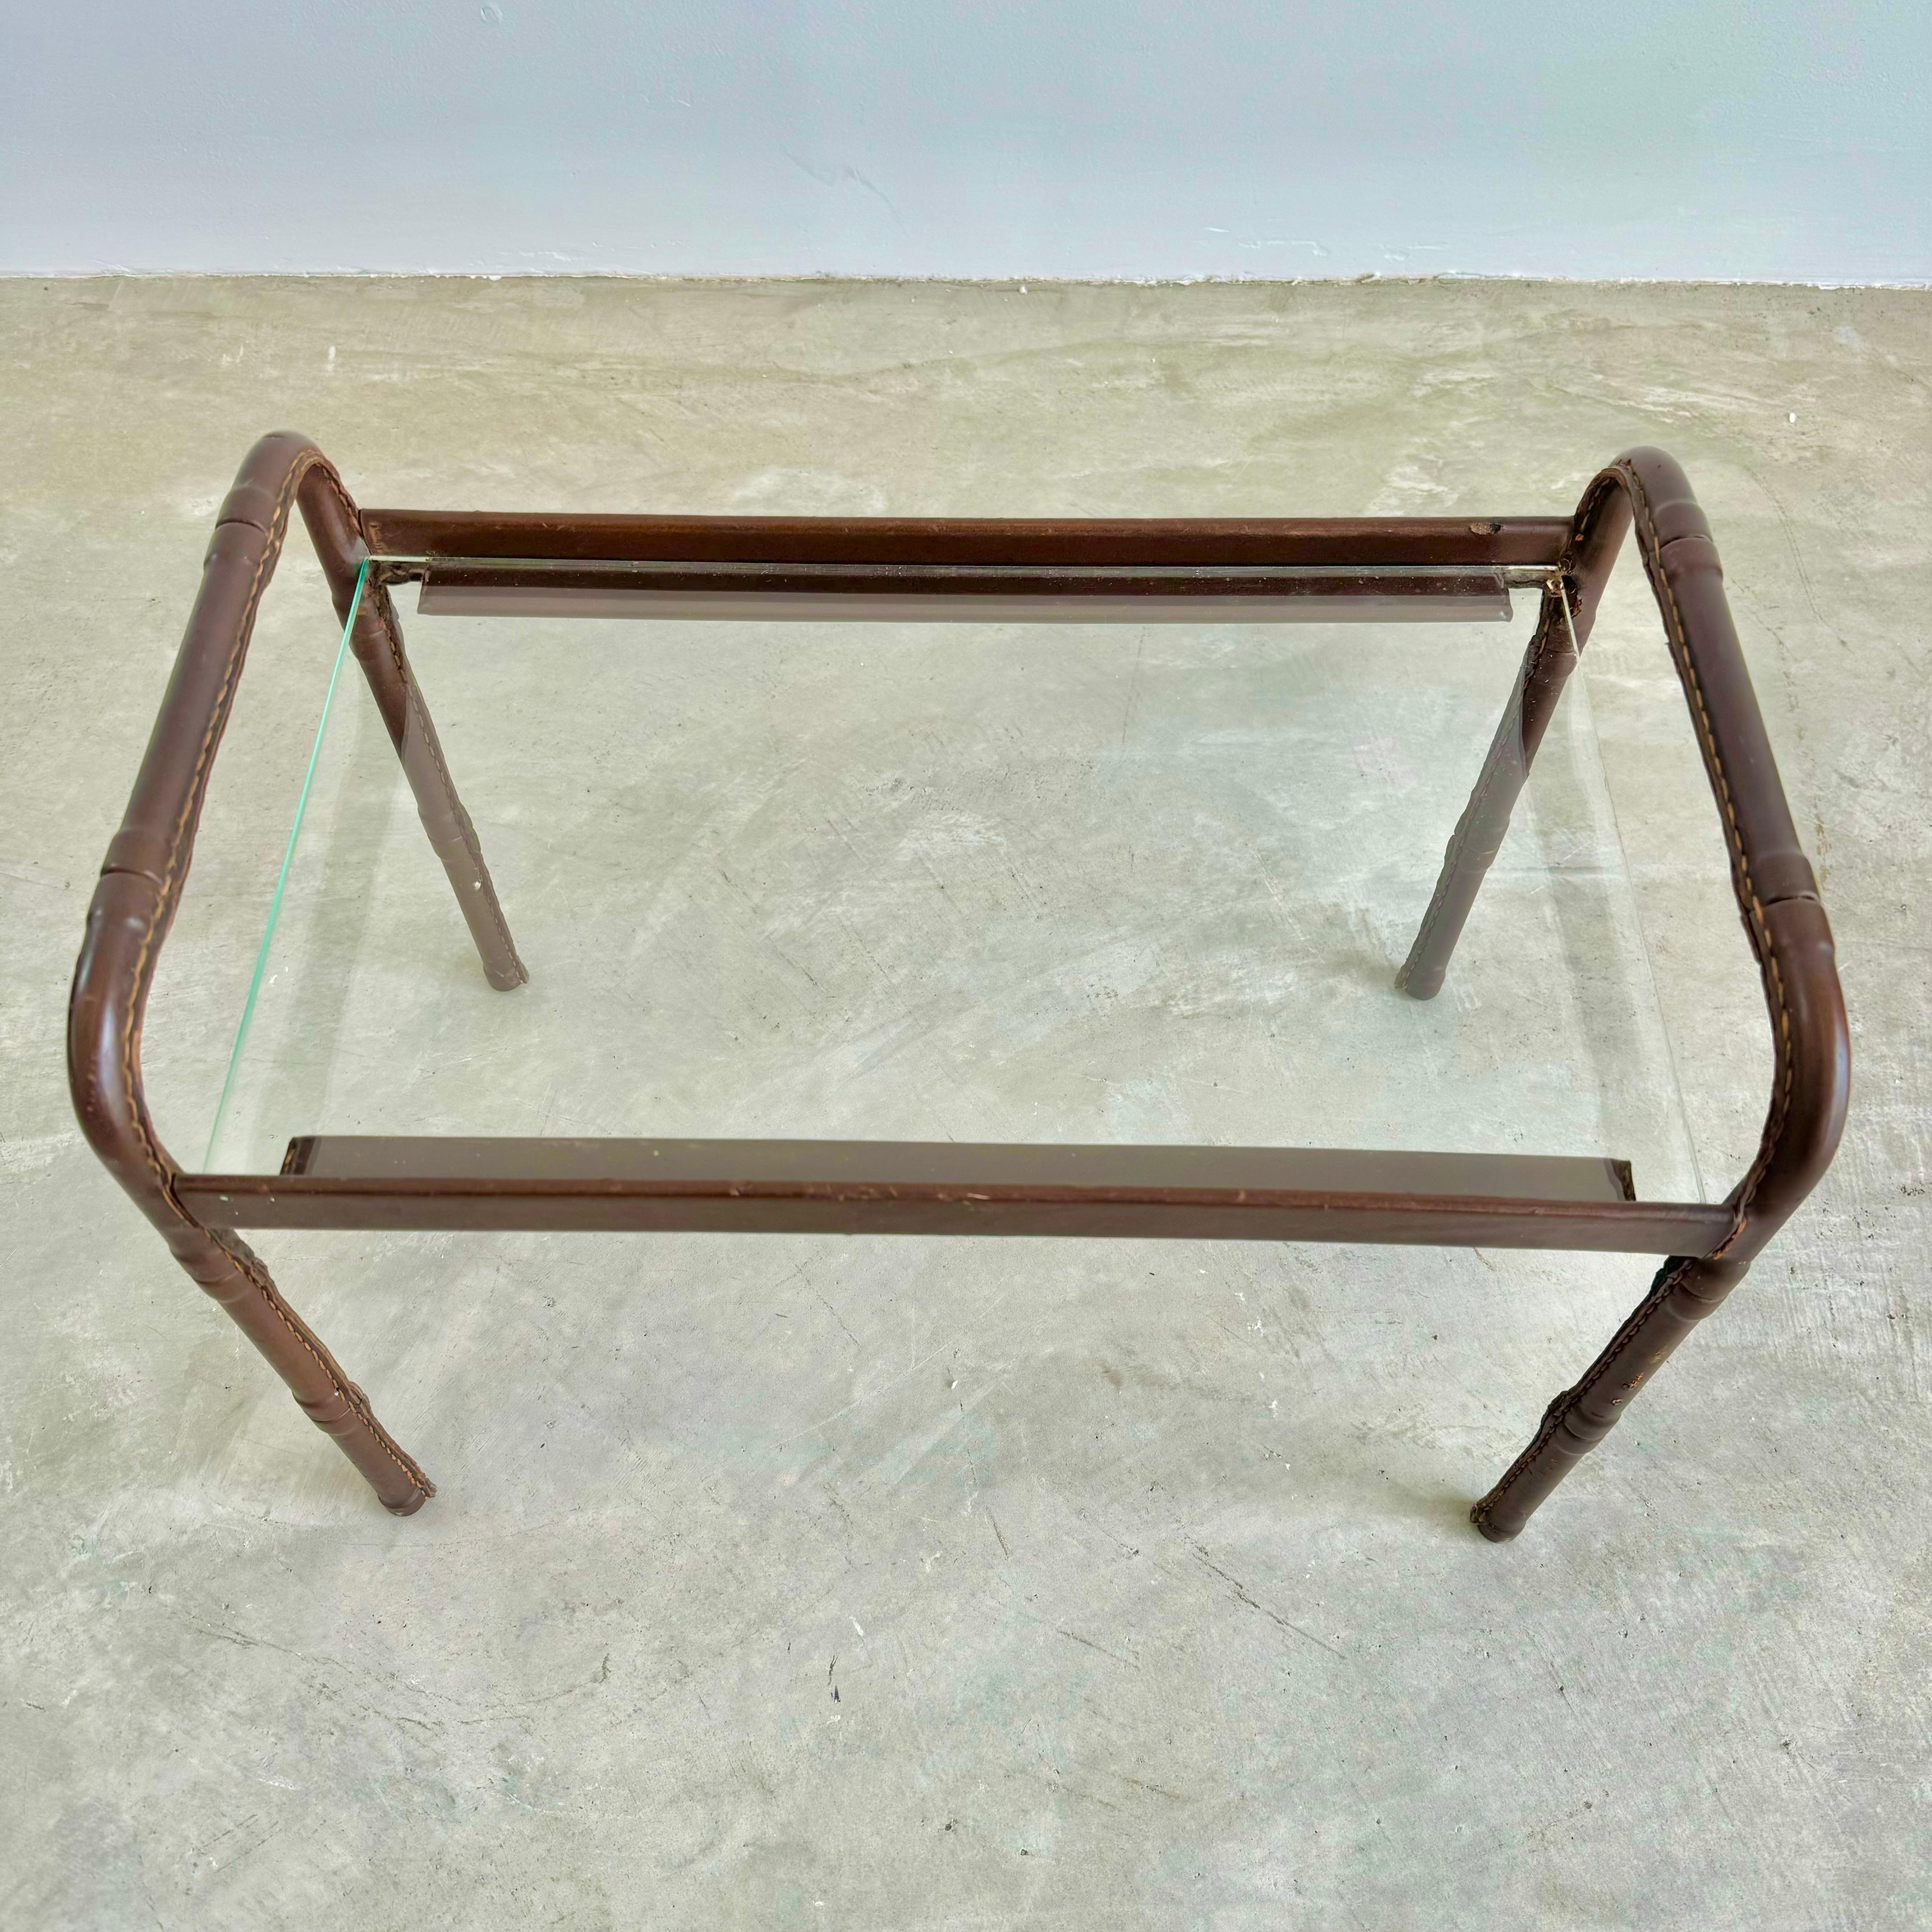 Art Deco Jacques Adnet Leather and Glass Side Table, 1950s France For Sale